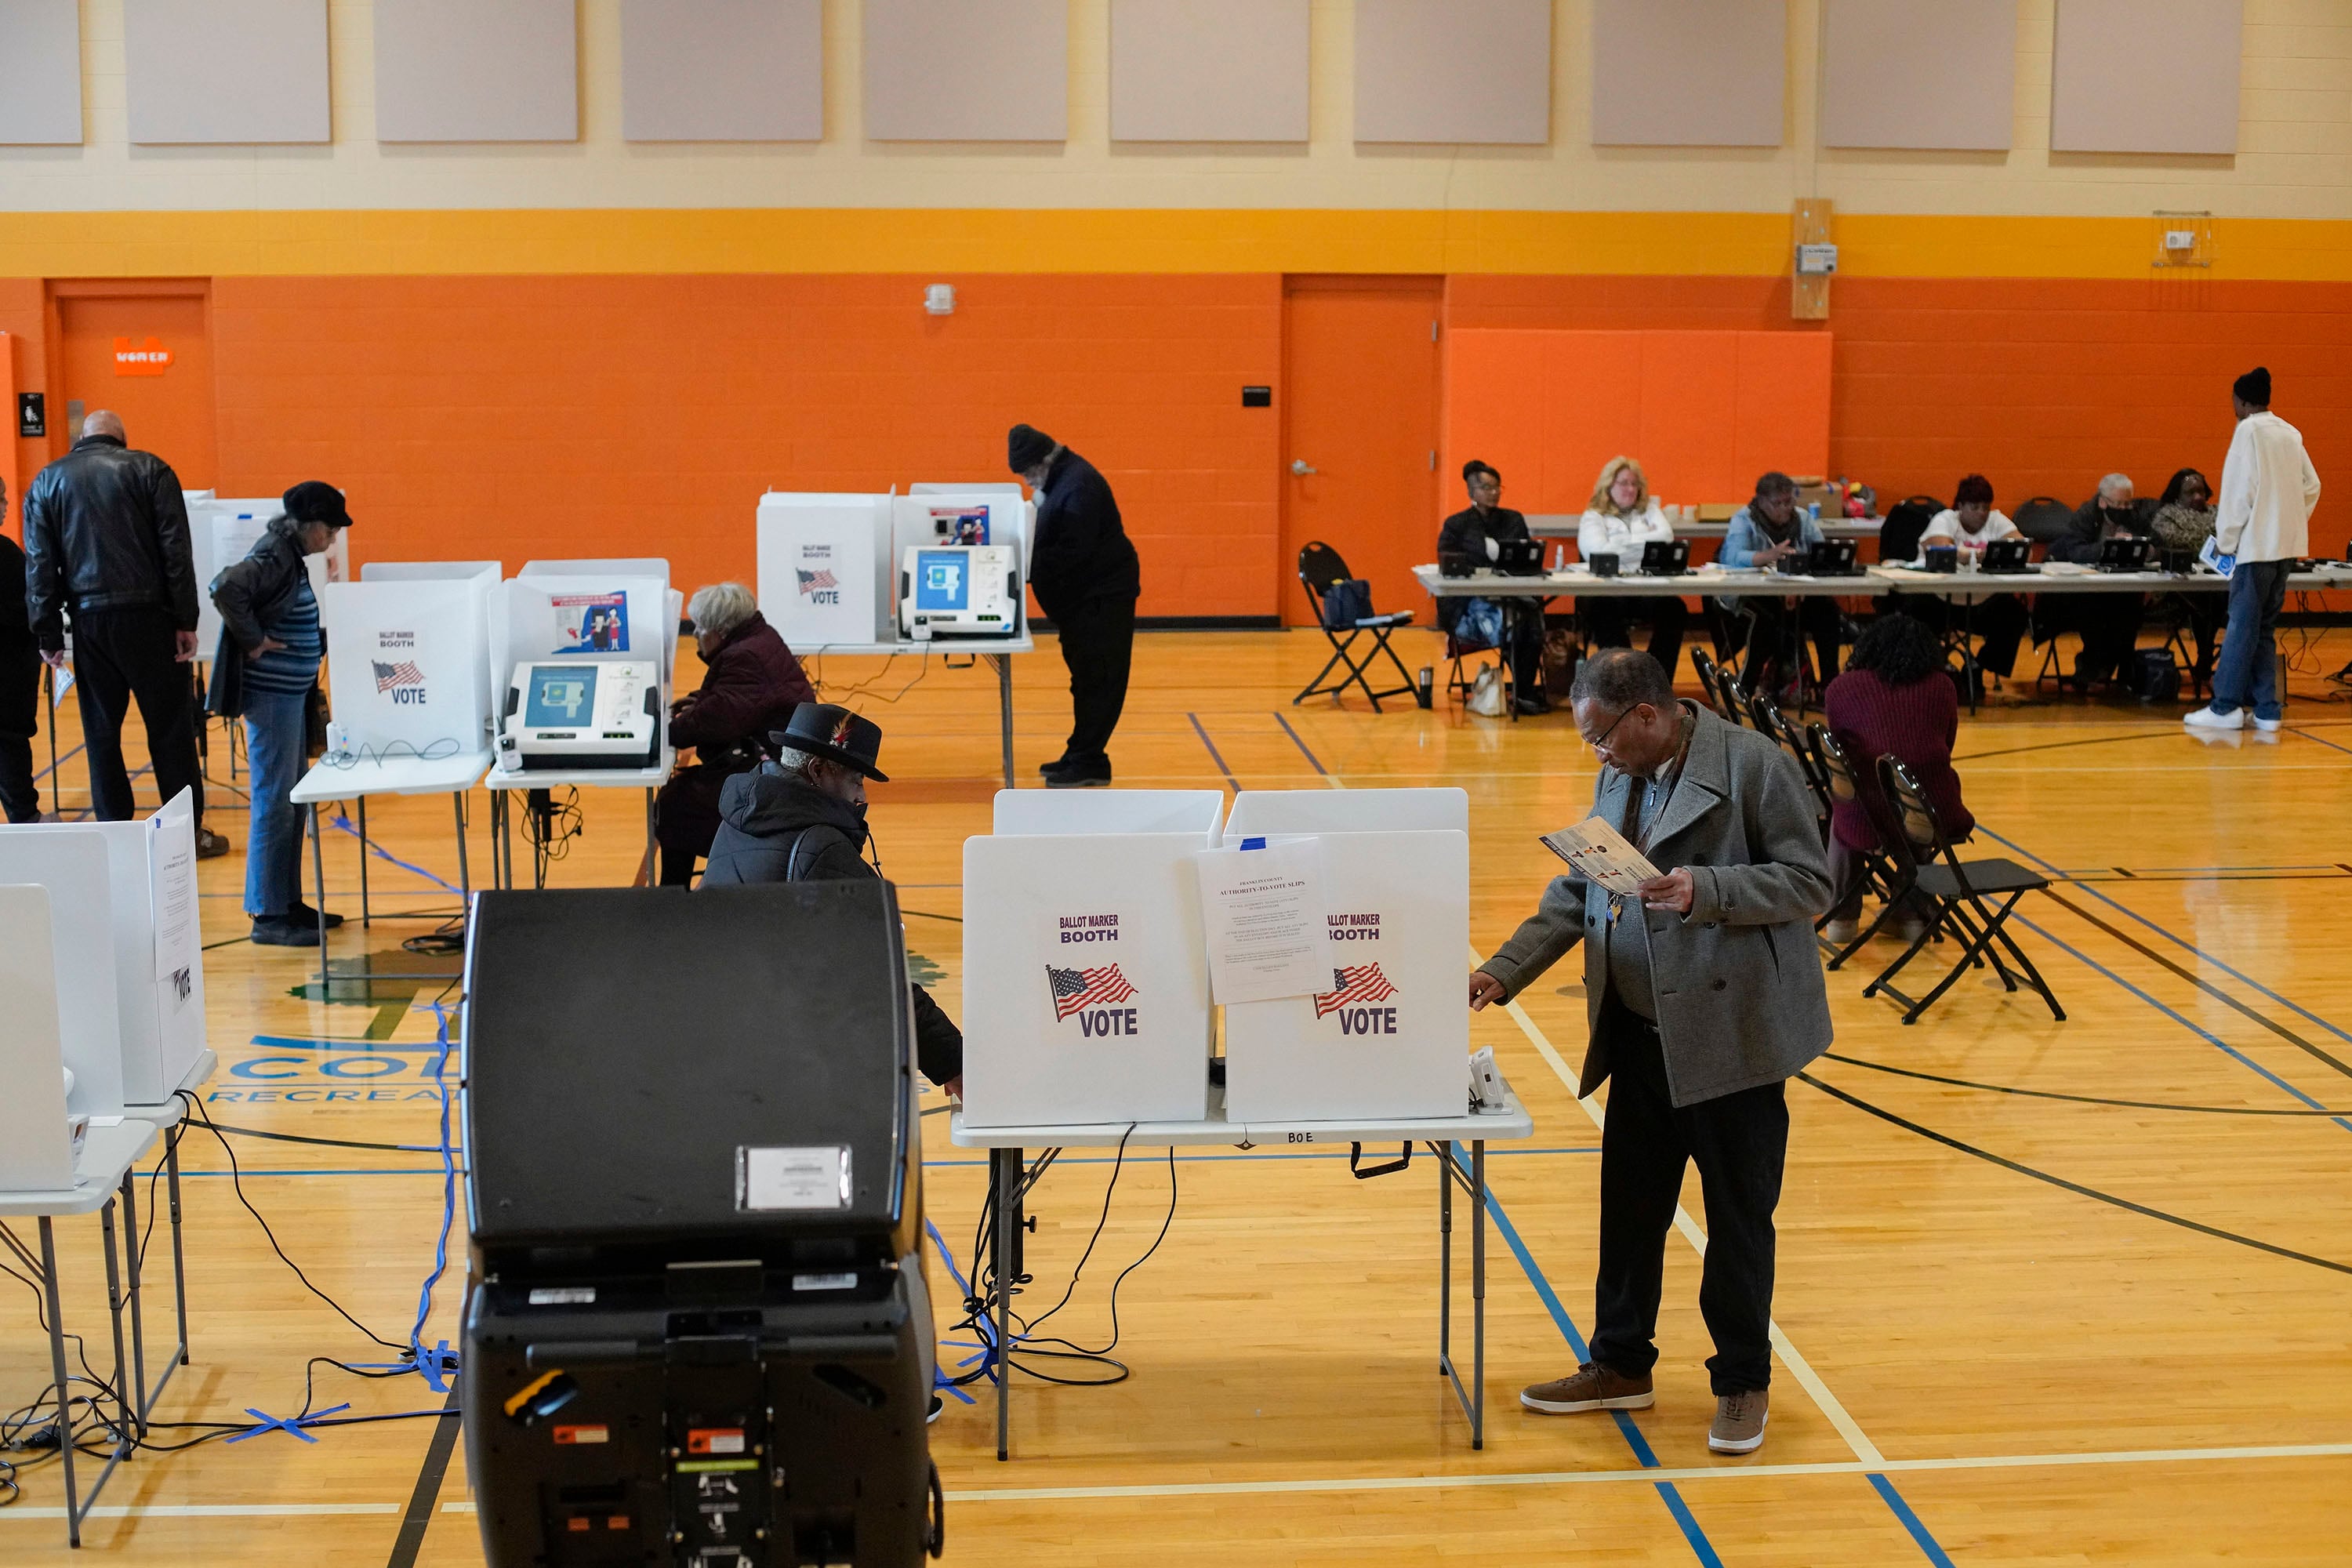 In a large gymnasium with an orange wall in the background, several people stand near voting booths in the middle and front of the frame with several people sitting in a row behind a table.